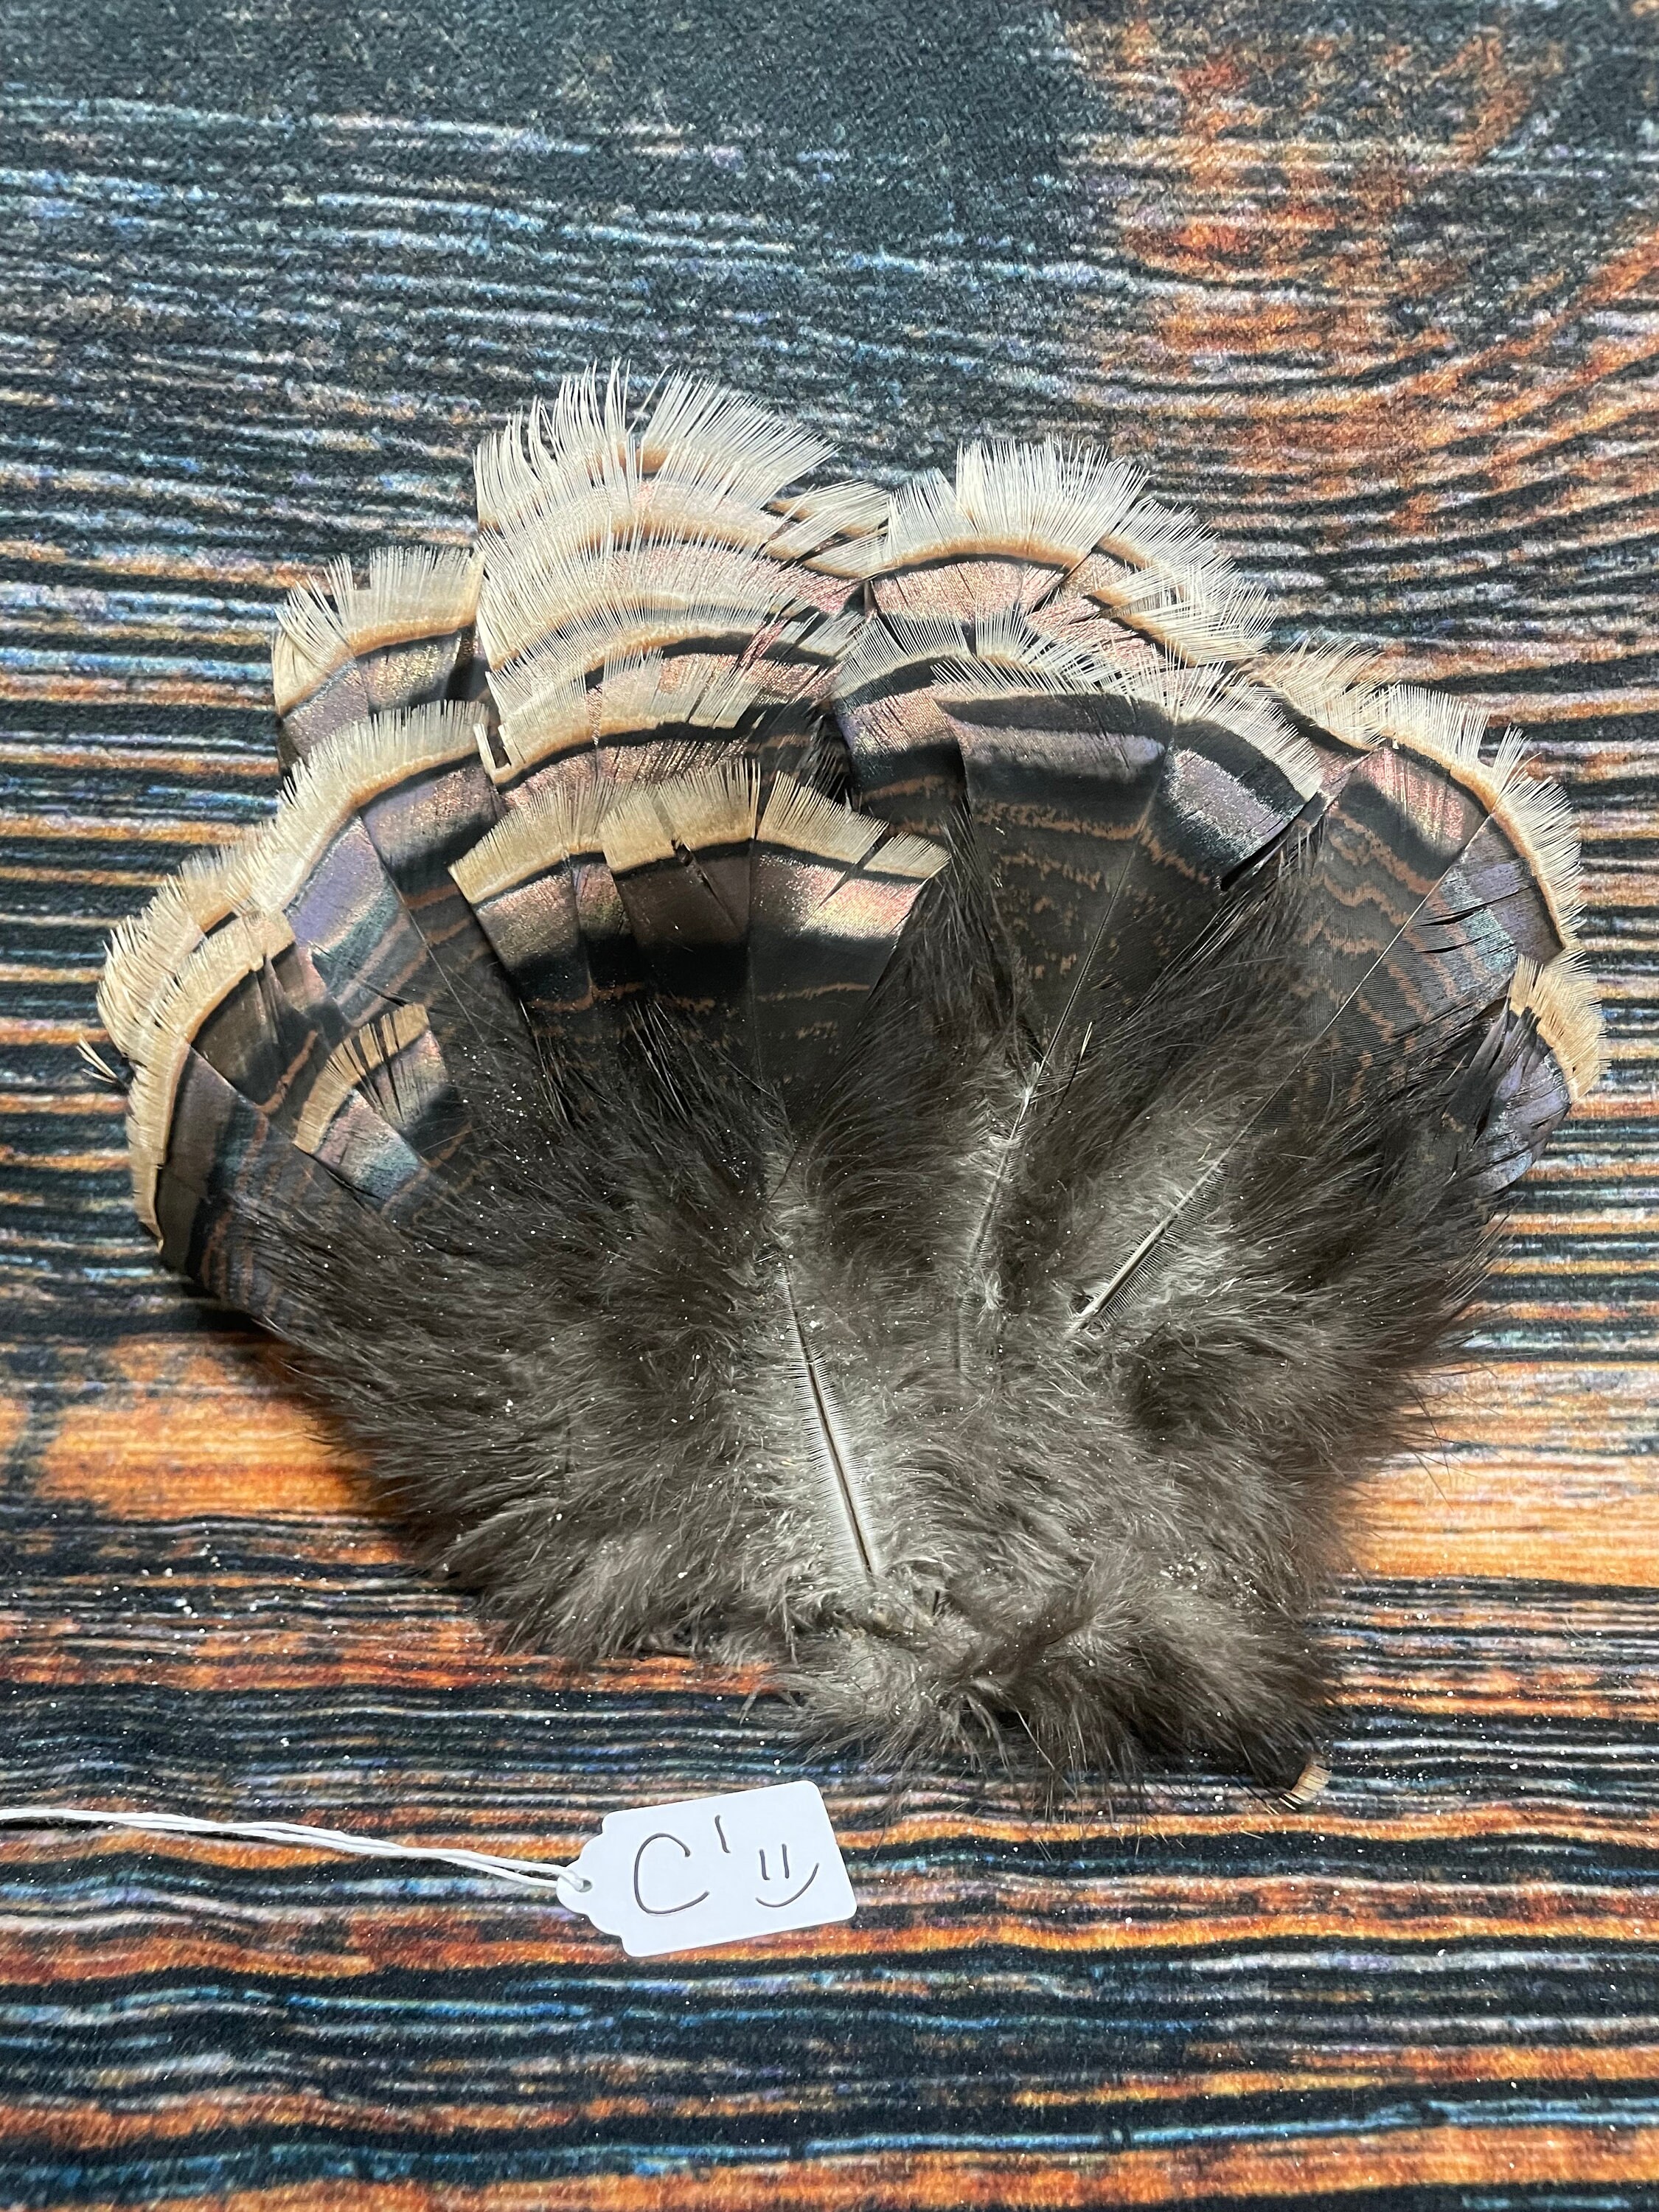 Raven Wing Feathers, 1/4 Lb Brown Turkey Pointers Quill Wing Wholesale  Feathers bulk Halloween Costume Fletching : 3628 